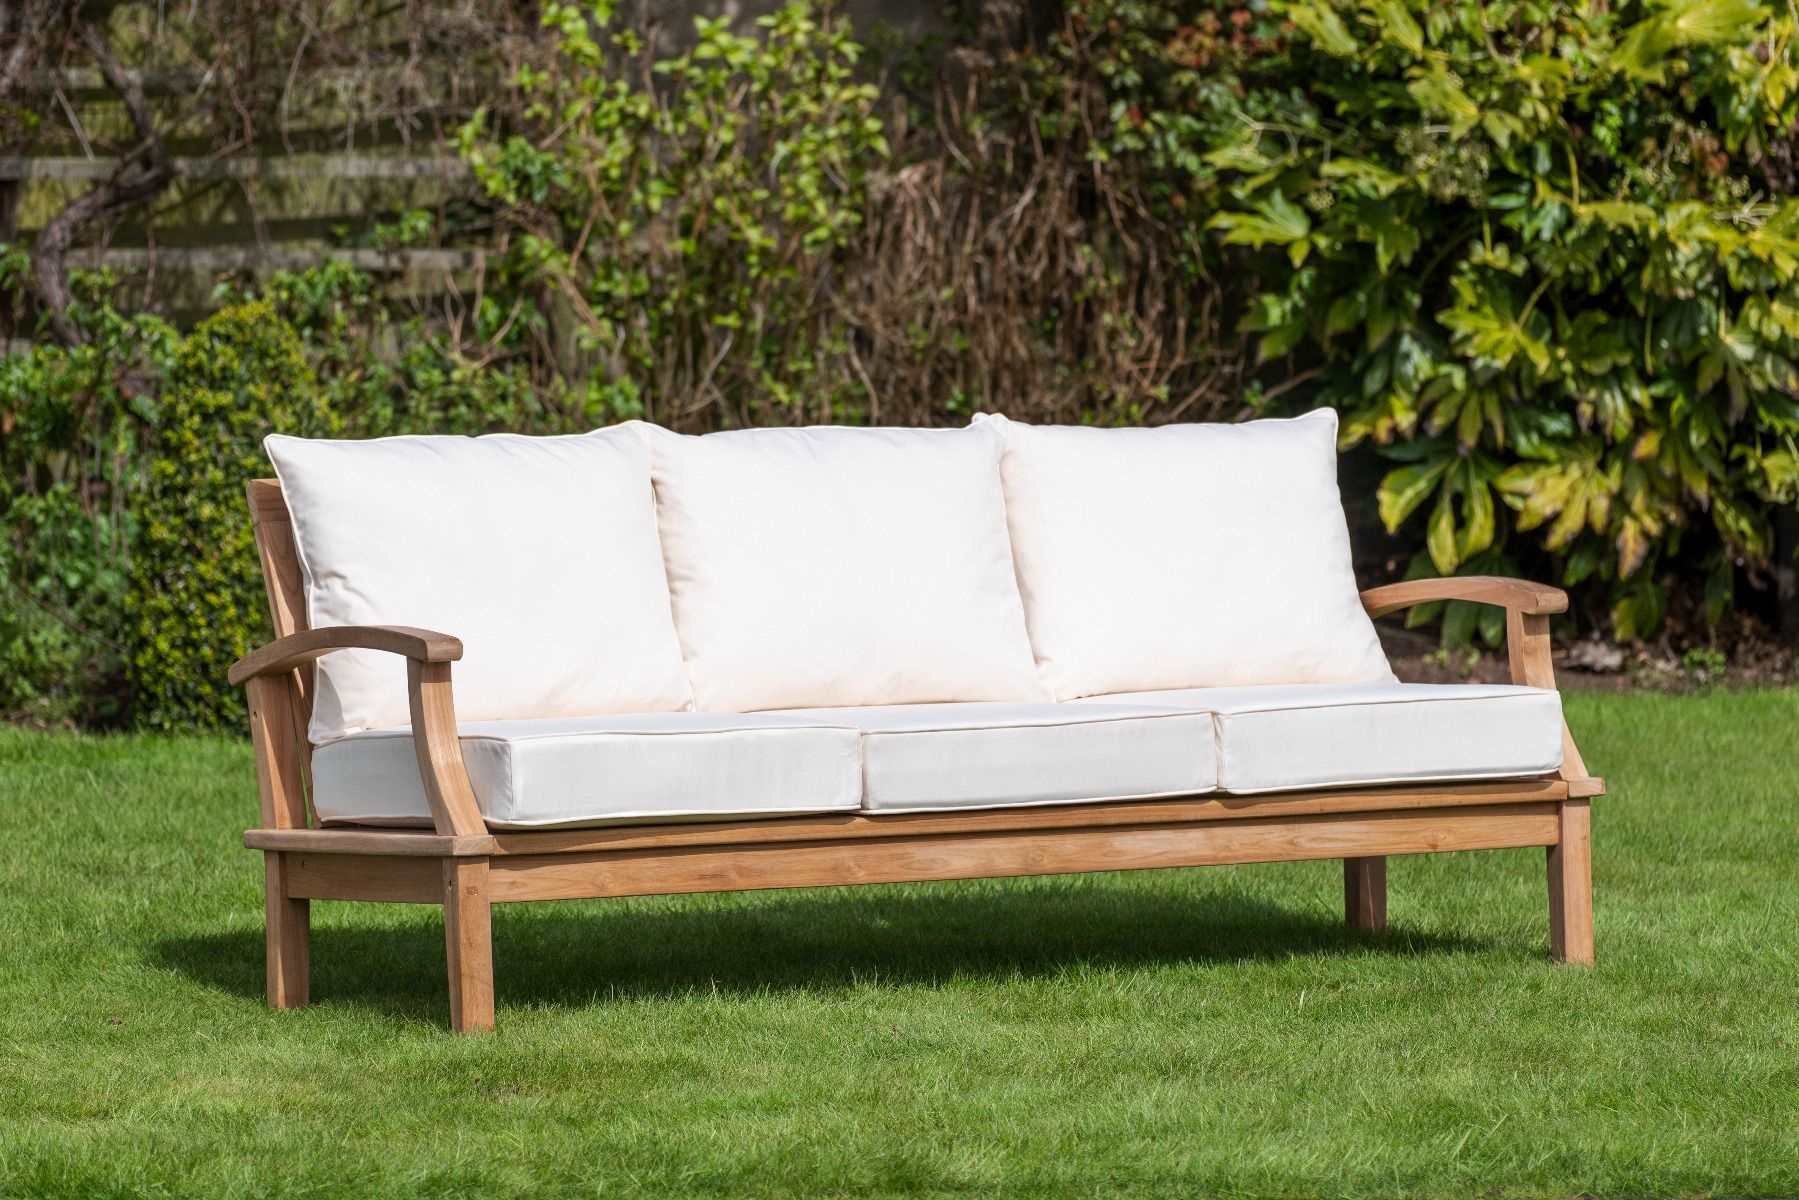 Discover The Incredible Benefits Of Teak Garden Sofas For Outdoor Seating!